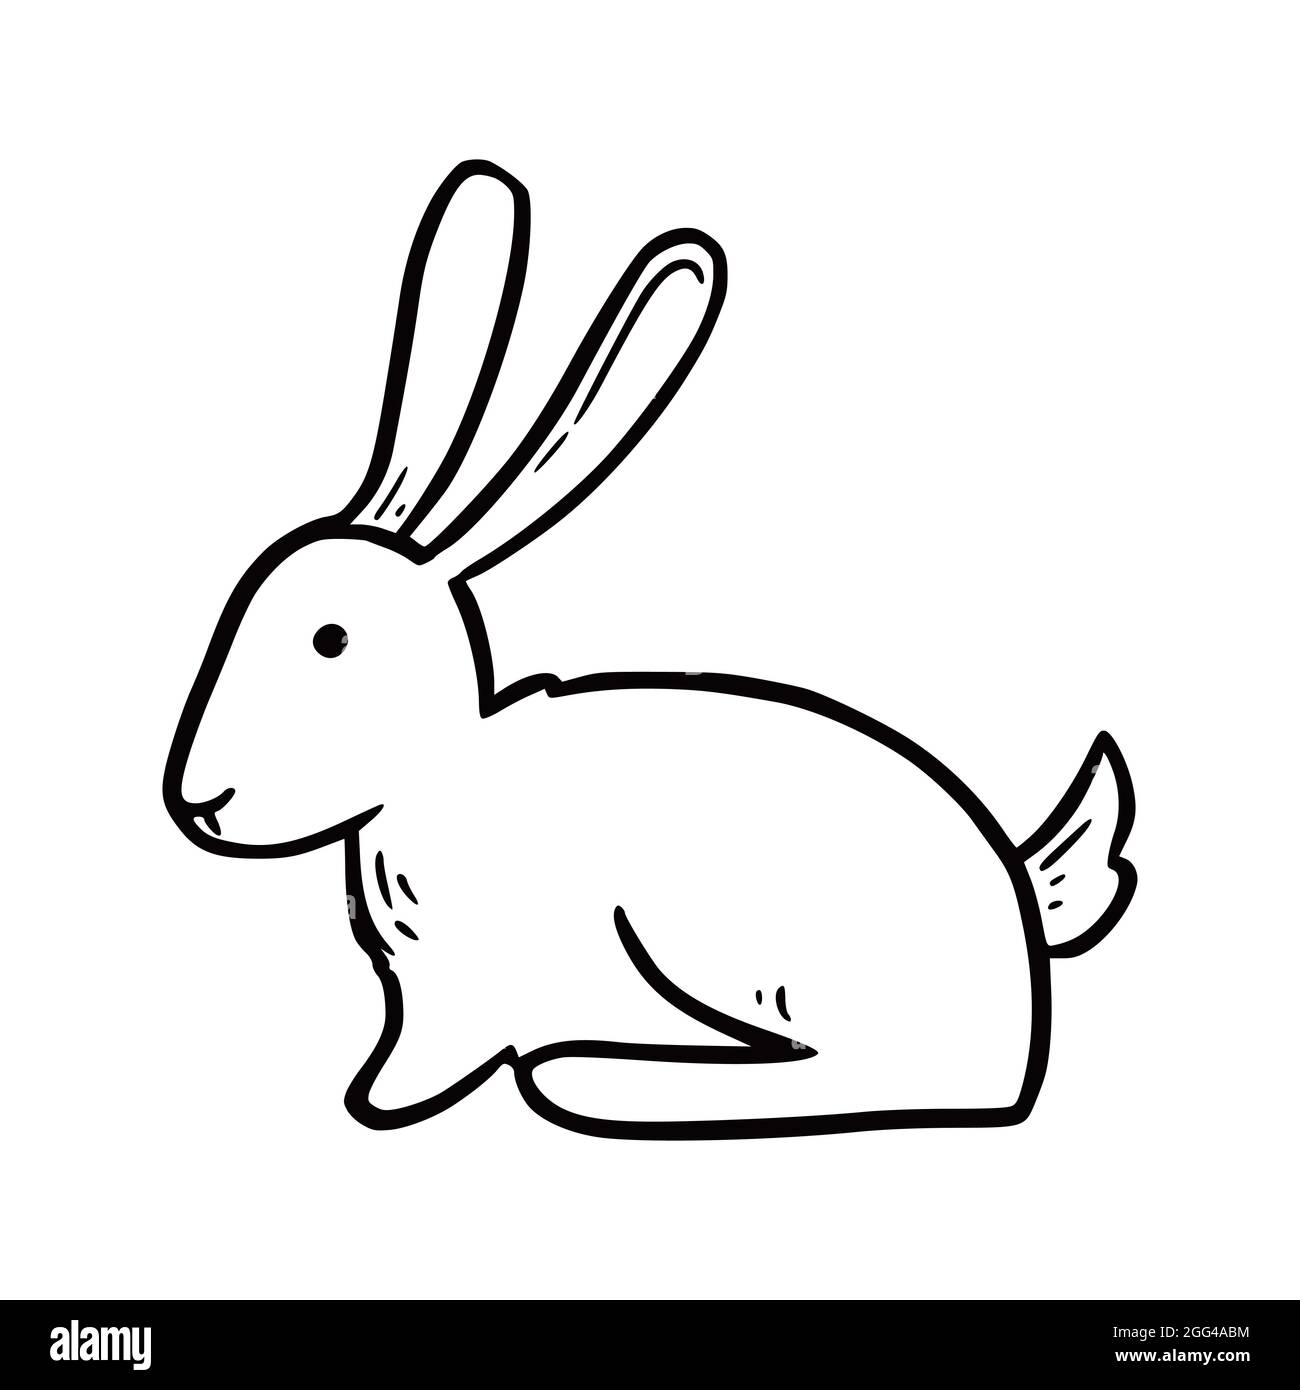 How to draw rabbit easy and step by step learn drawing with draw easy   YouTube